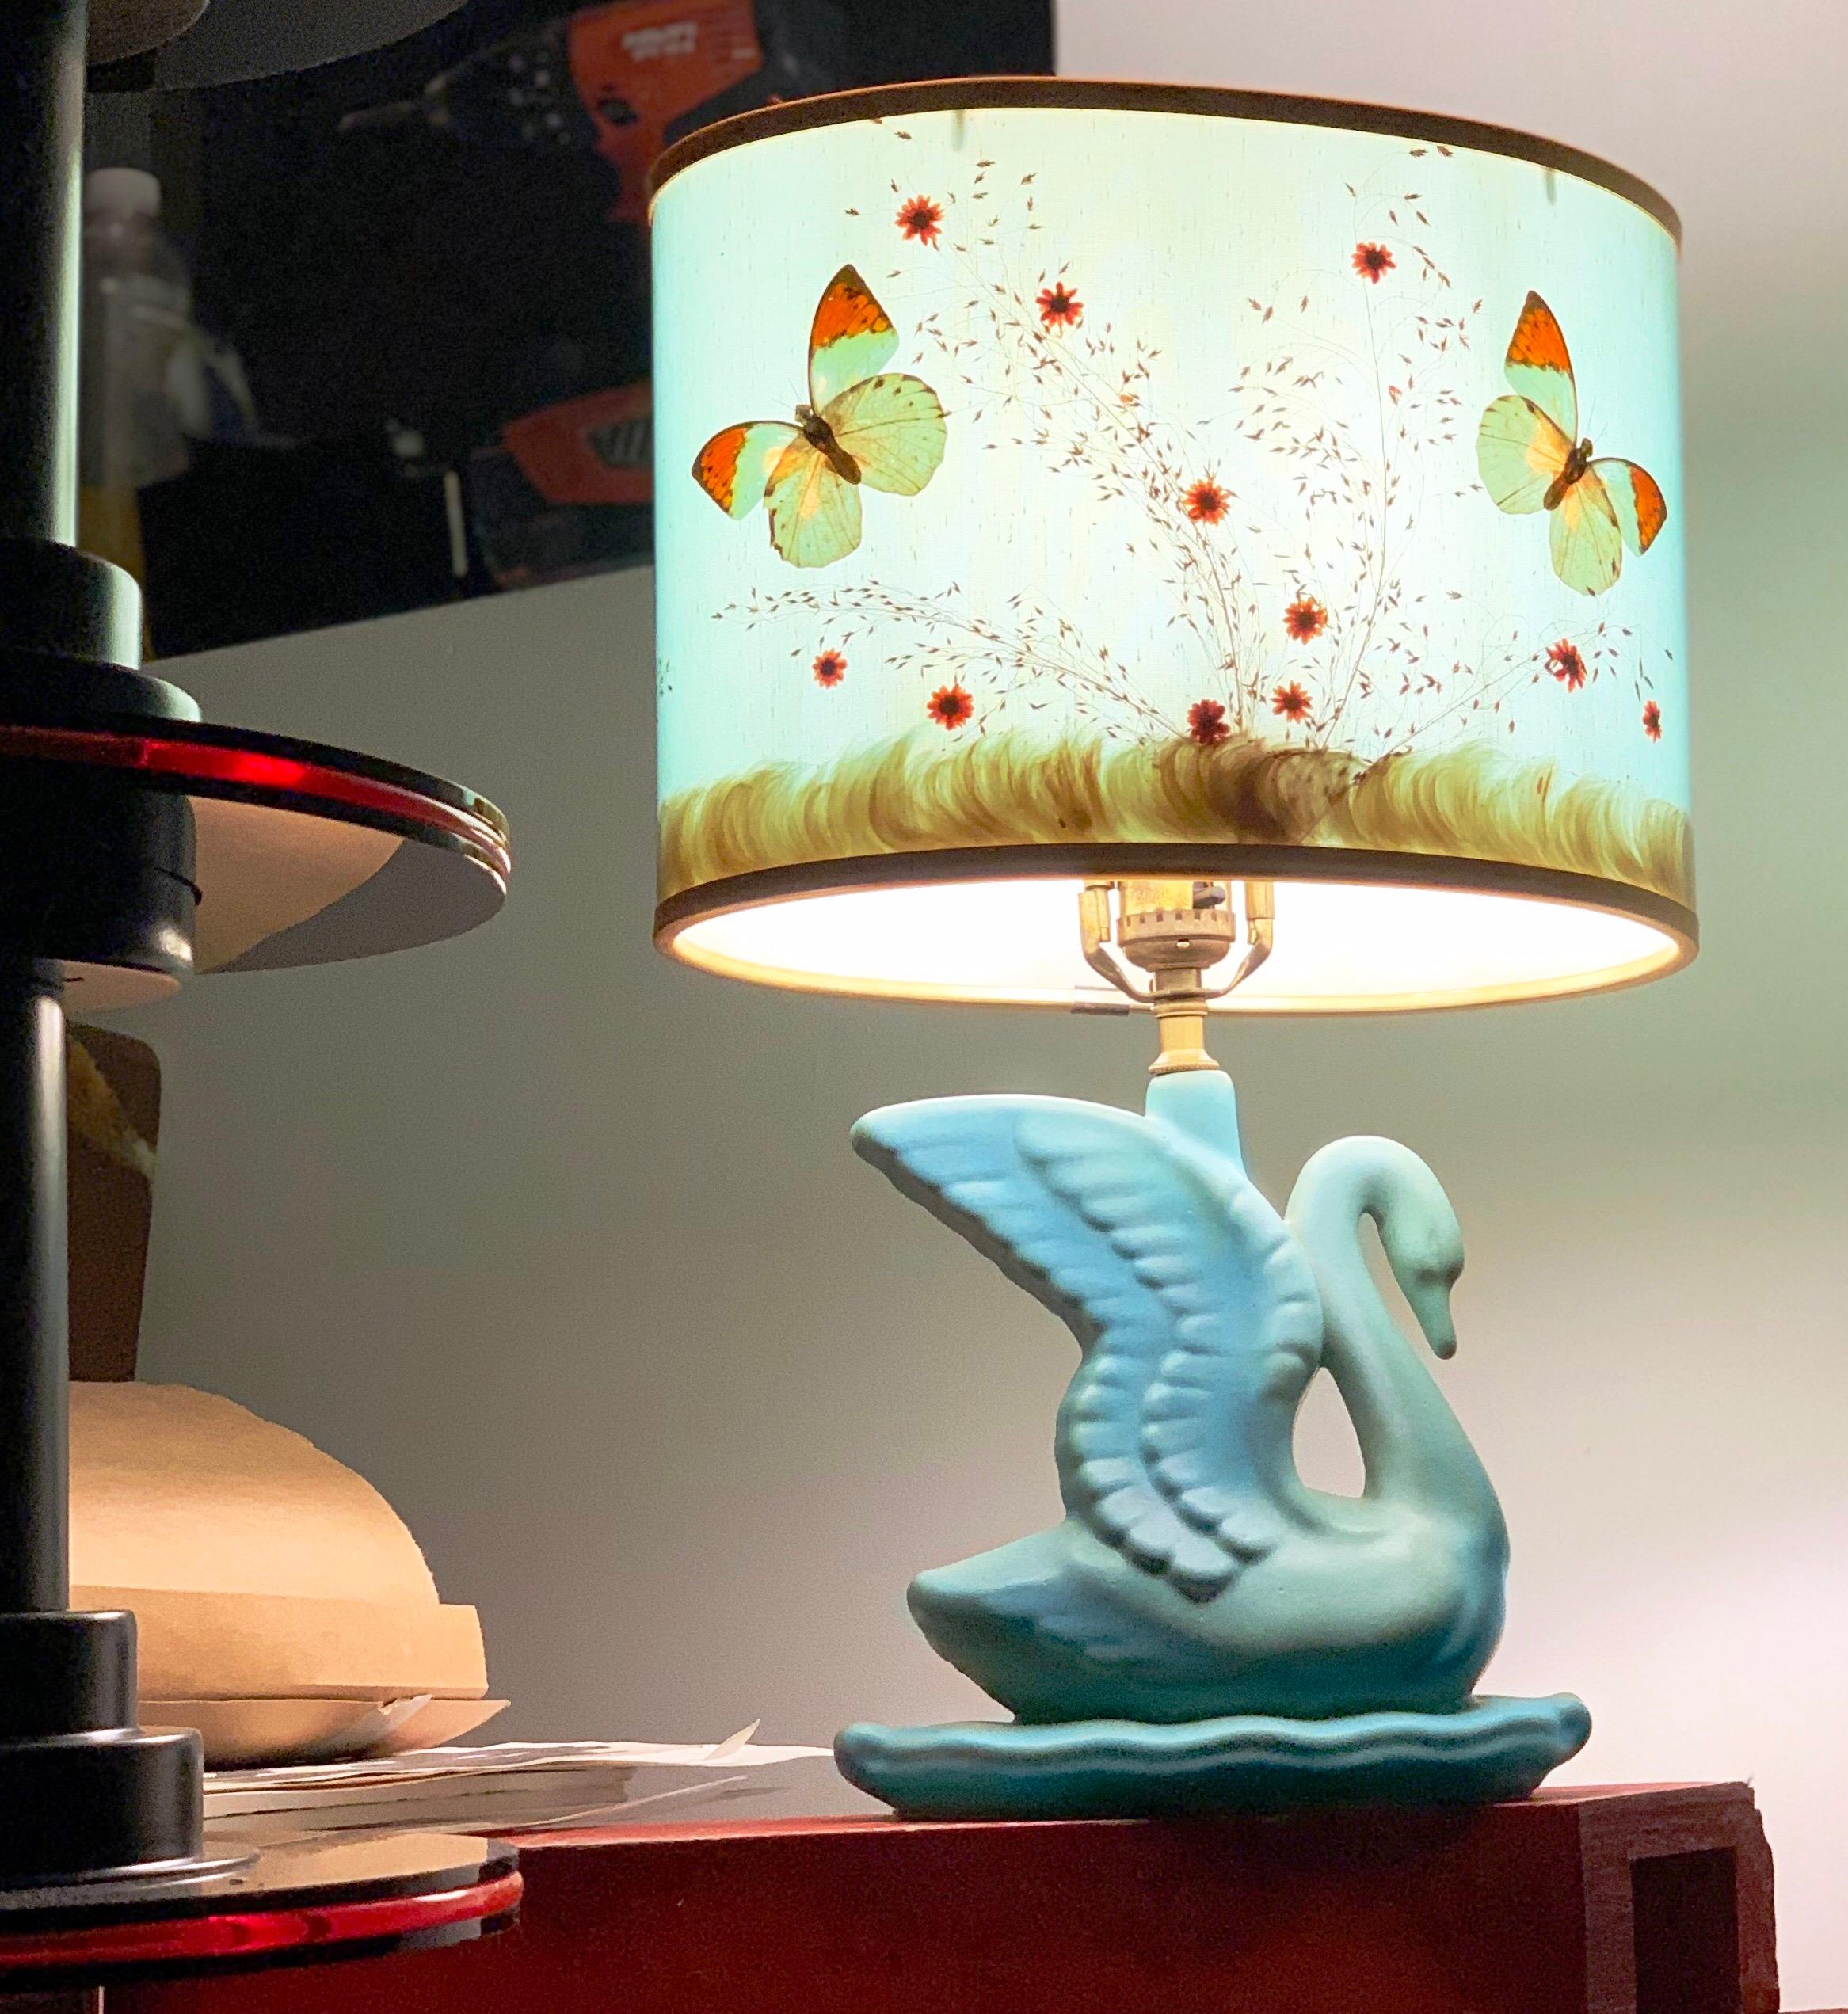 This is a vintage Van Briggle Swan lamp in the famed matte blue glaze that Van Briggle made its name with in the early years of the 20th century. It has the requisite Van Briggle mark at its base and is in excellent original vintage condition,